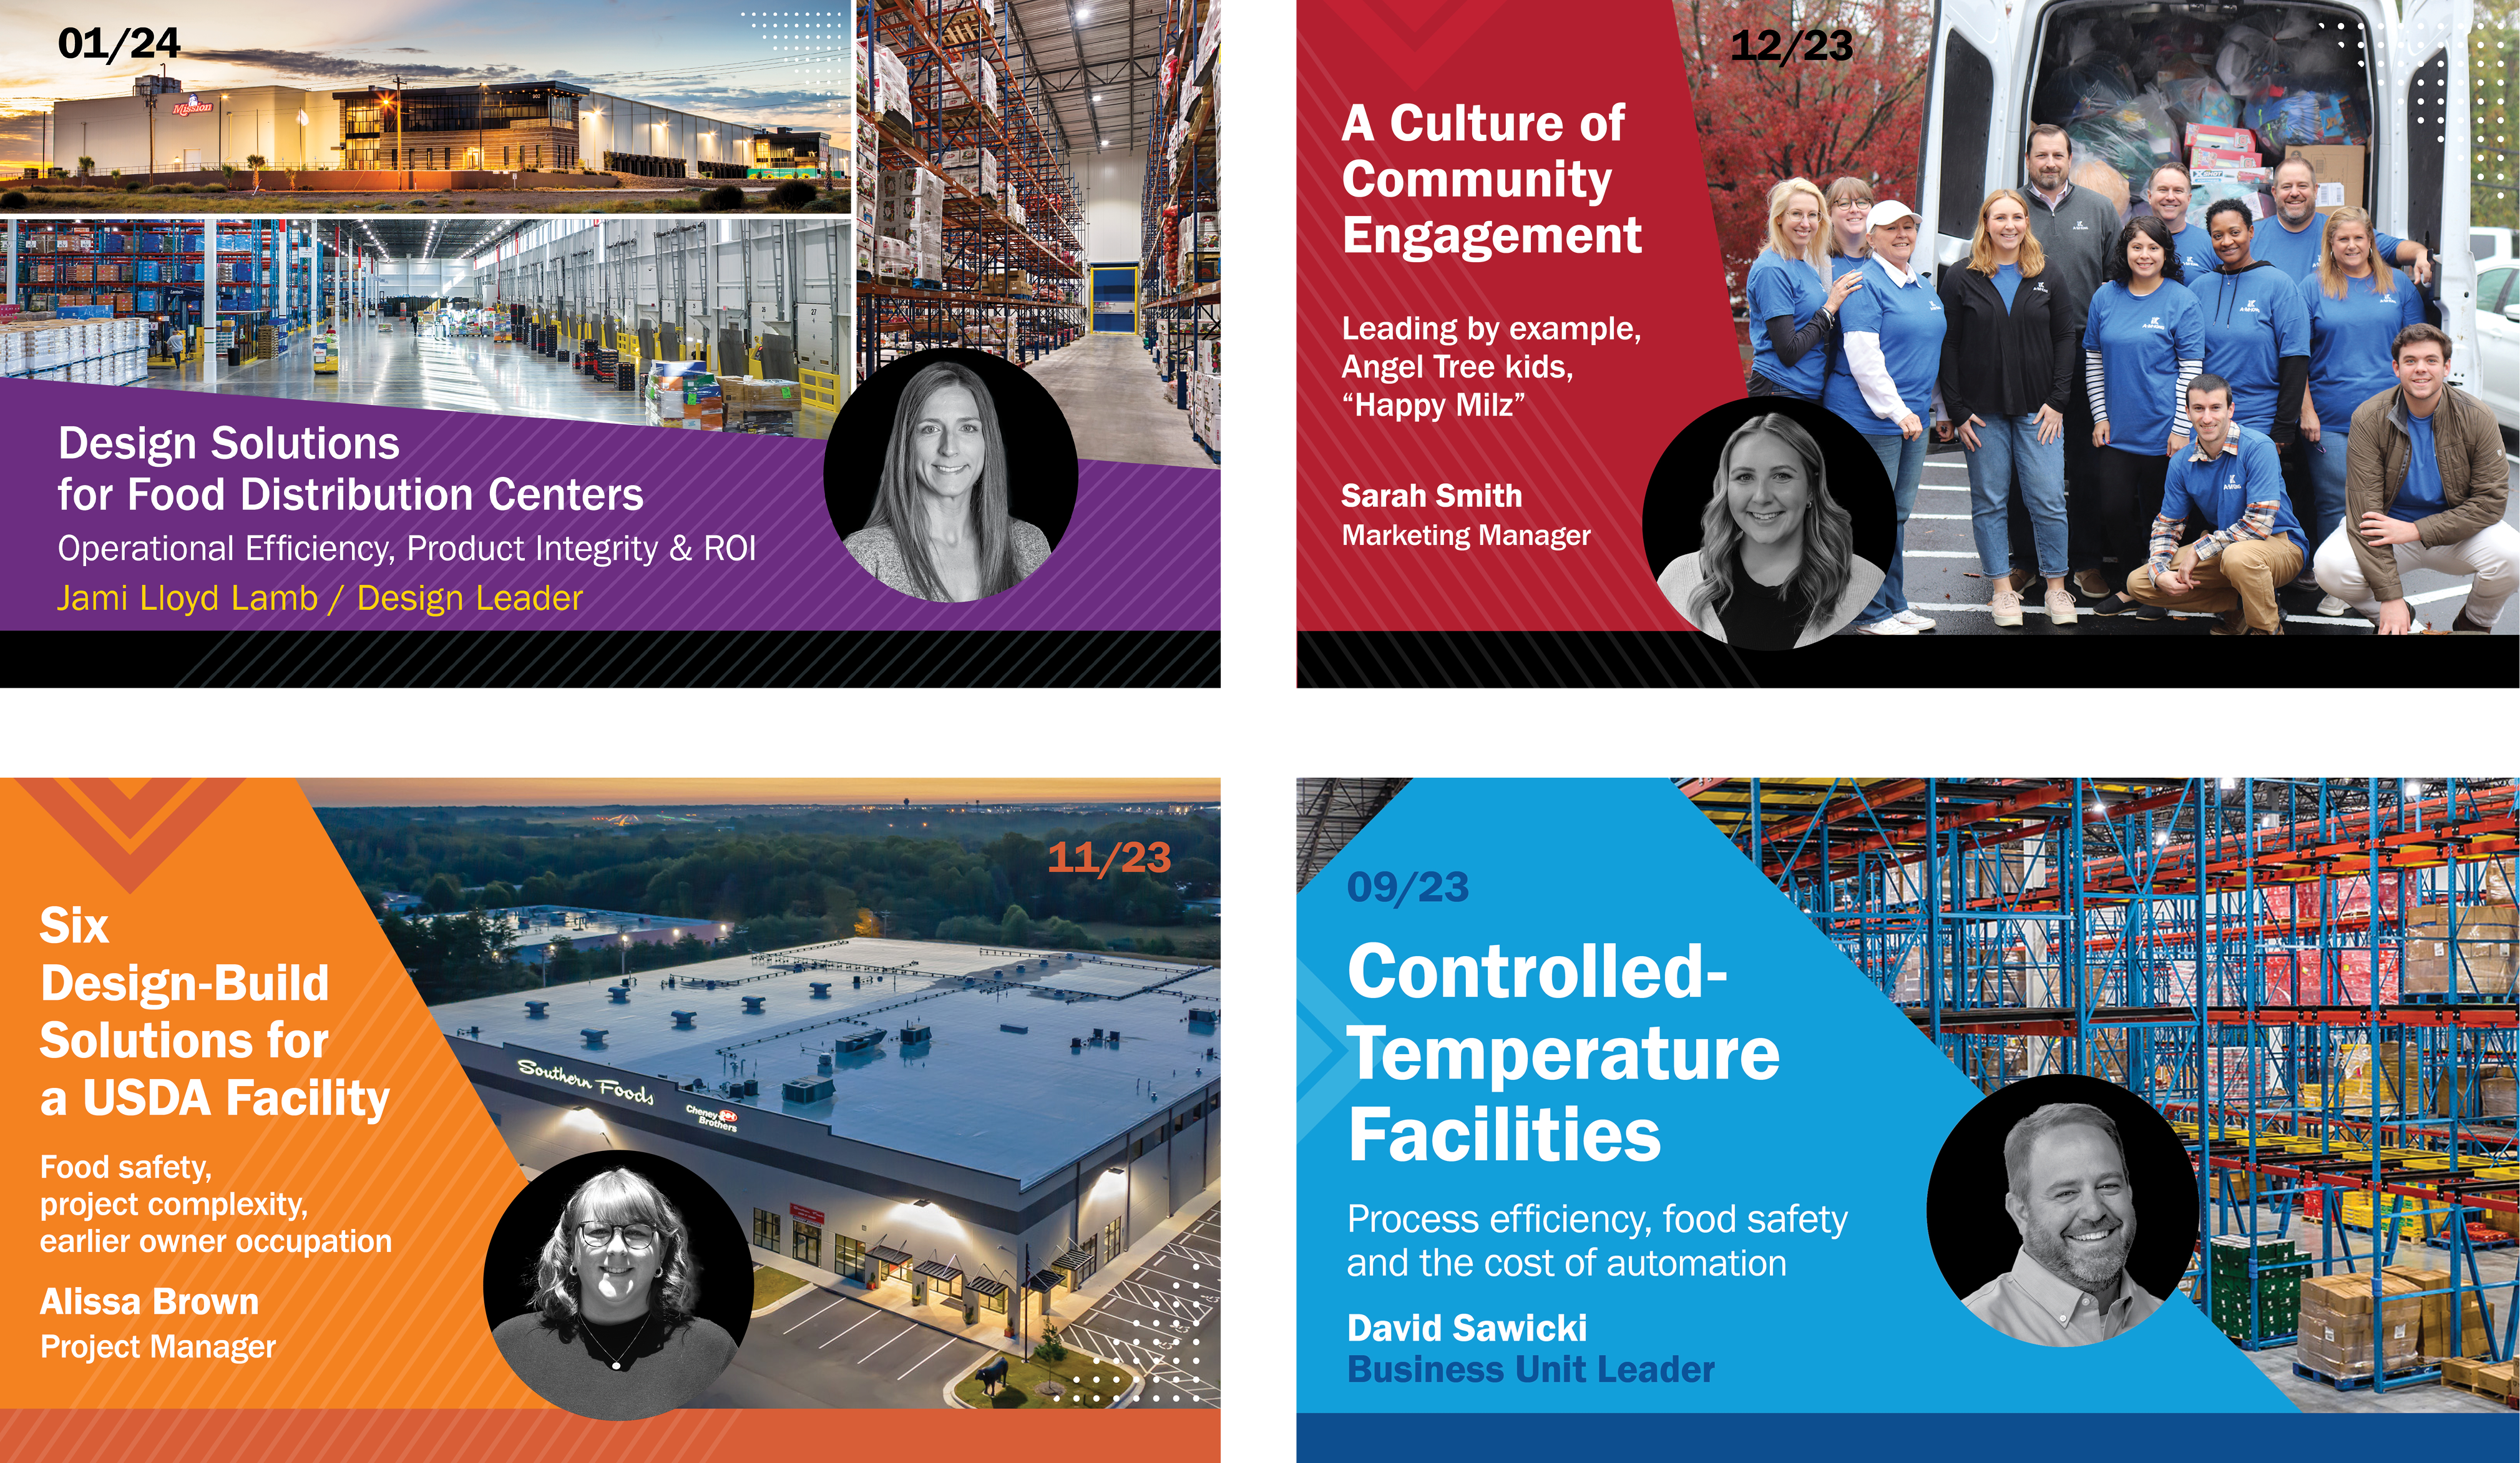 A M King's 20th Anniversary: 10 Achievements That Define Us. Our blog authors cover issues related to controlled-temperature facilities, USDA-certified facilities, defining design solutions, cost efficiencies, leadership, community engagement, and much more. A M King.